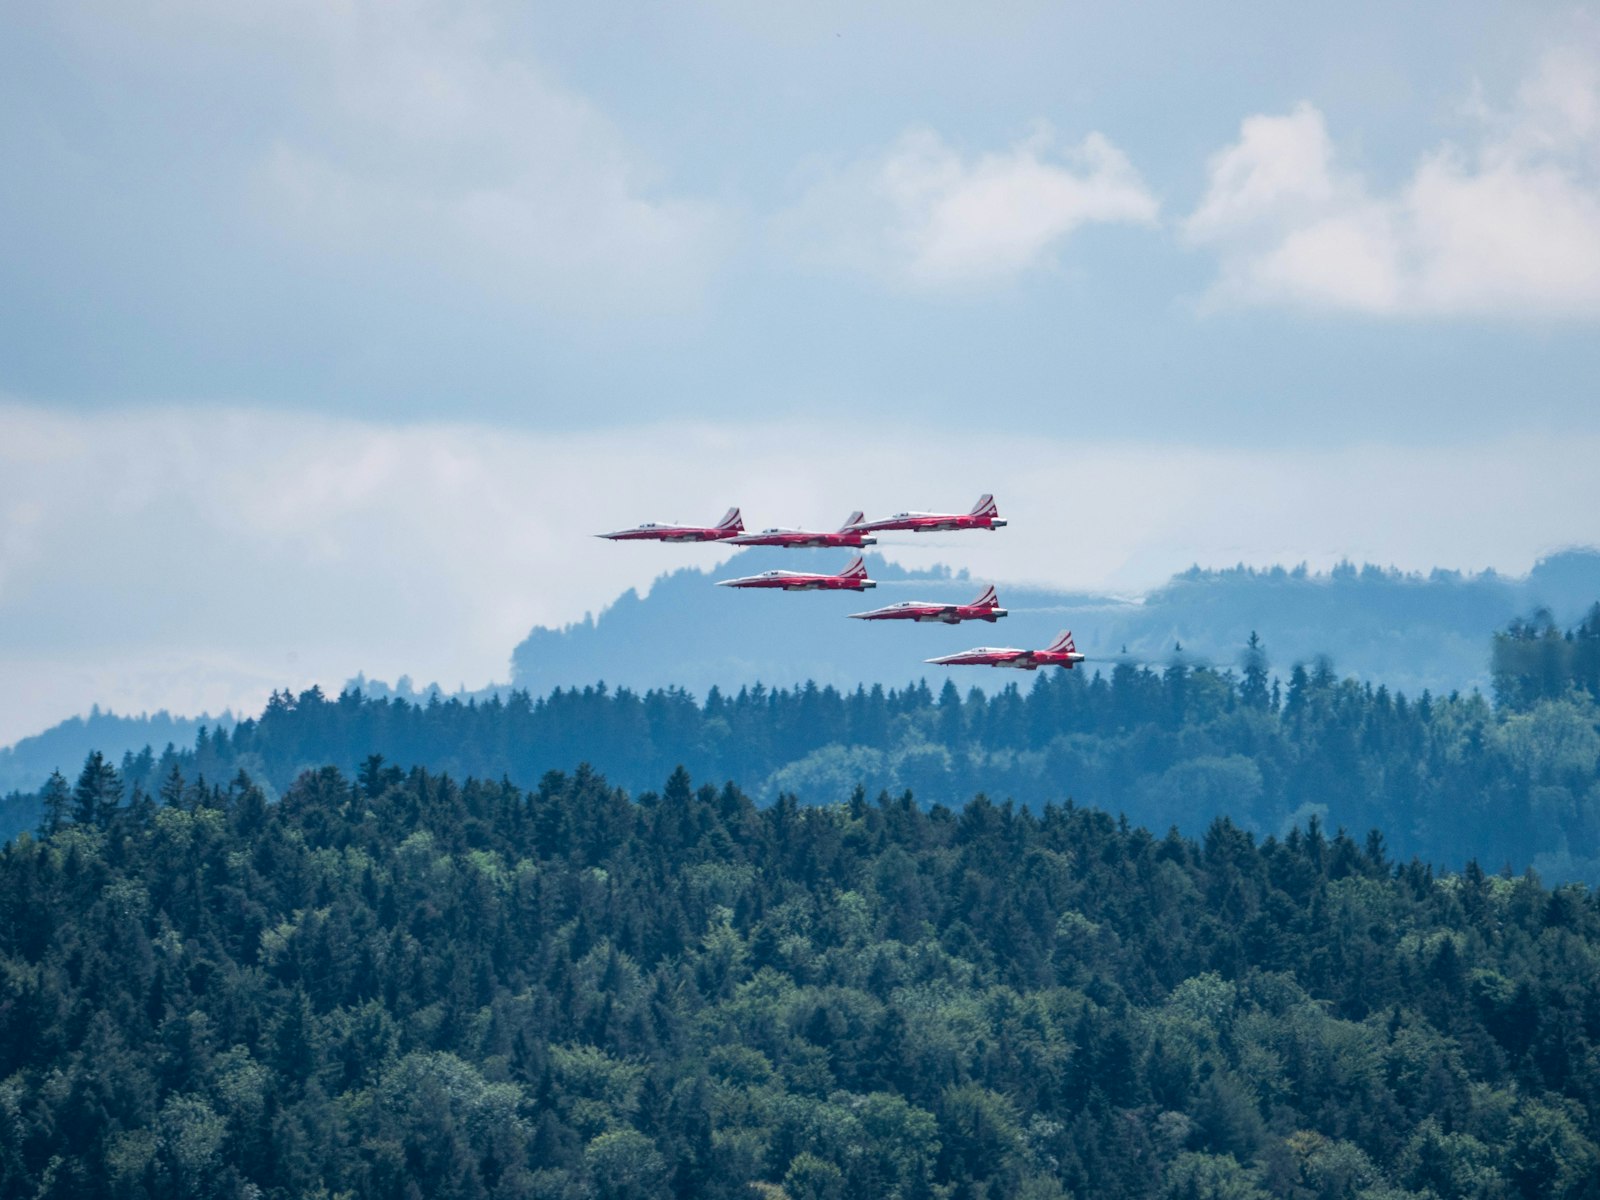 Panasonic Lumix DC-GH5 sample photo. Red-and-white airplanes flaying above photography